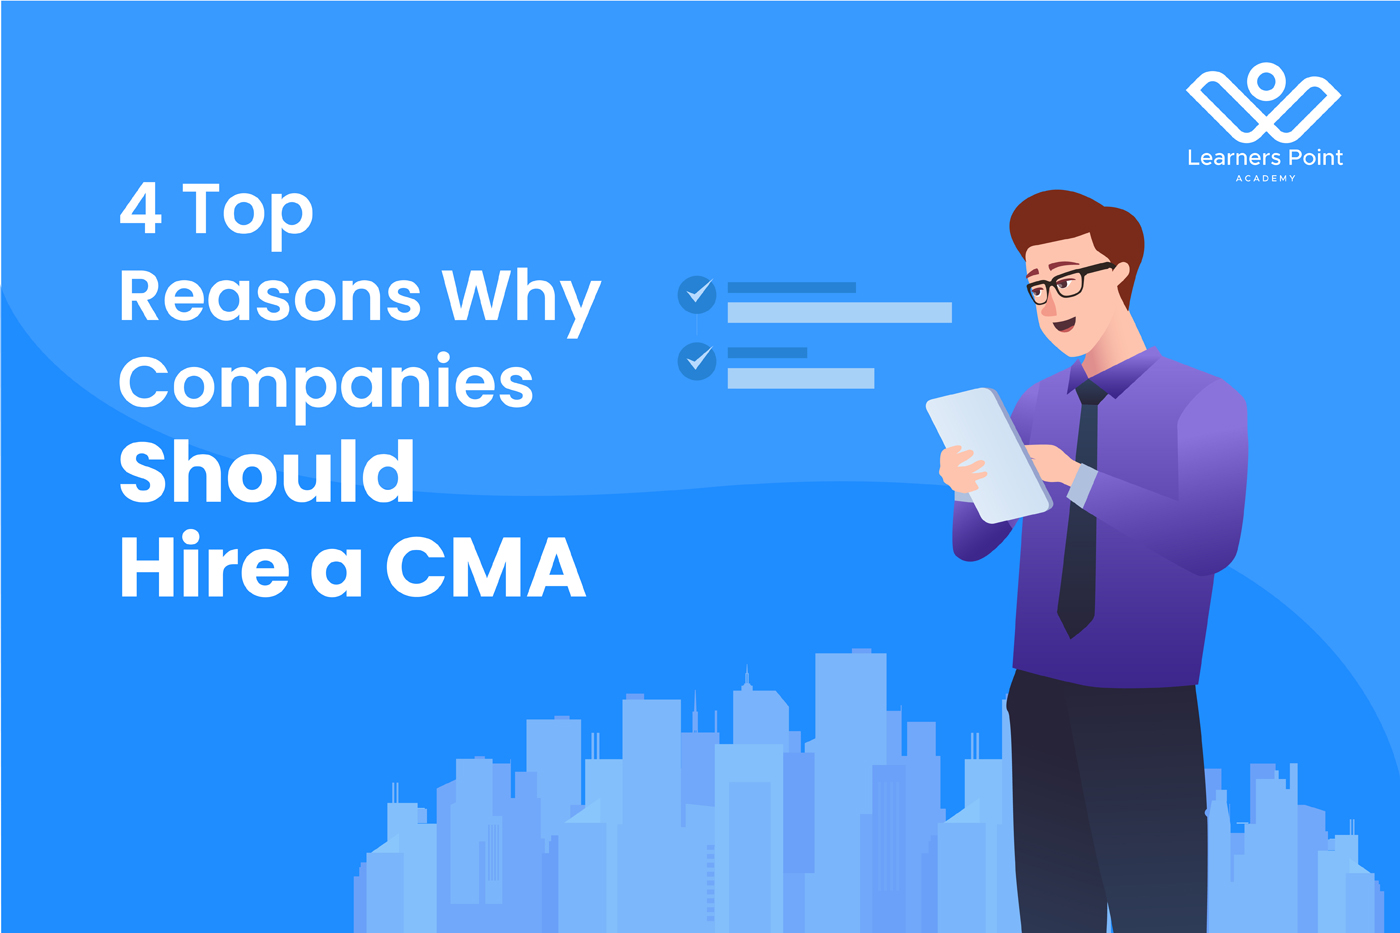 4 Top Reasons Why Companies Should Hire a CMA